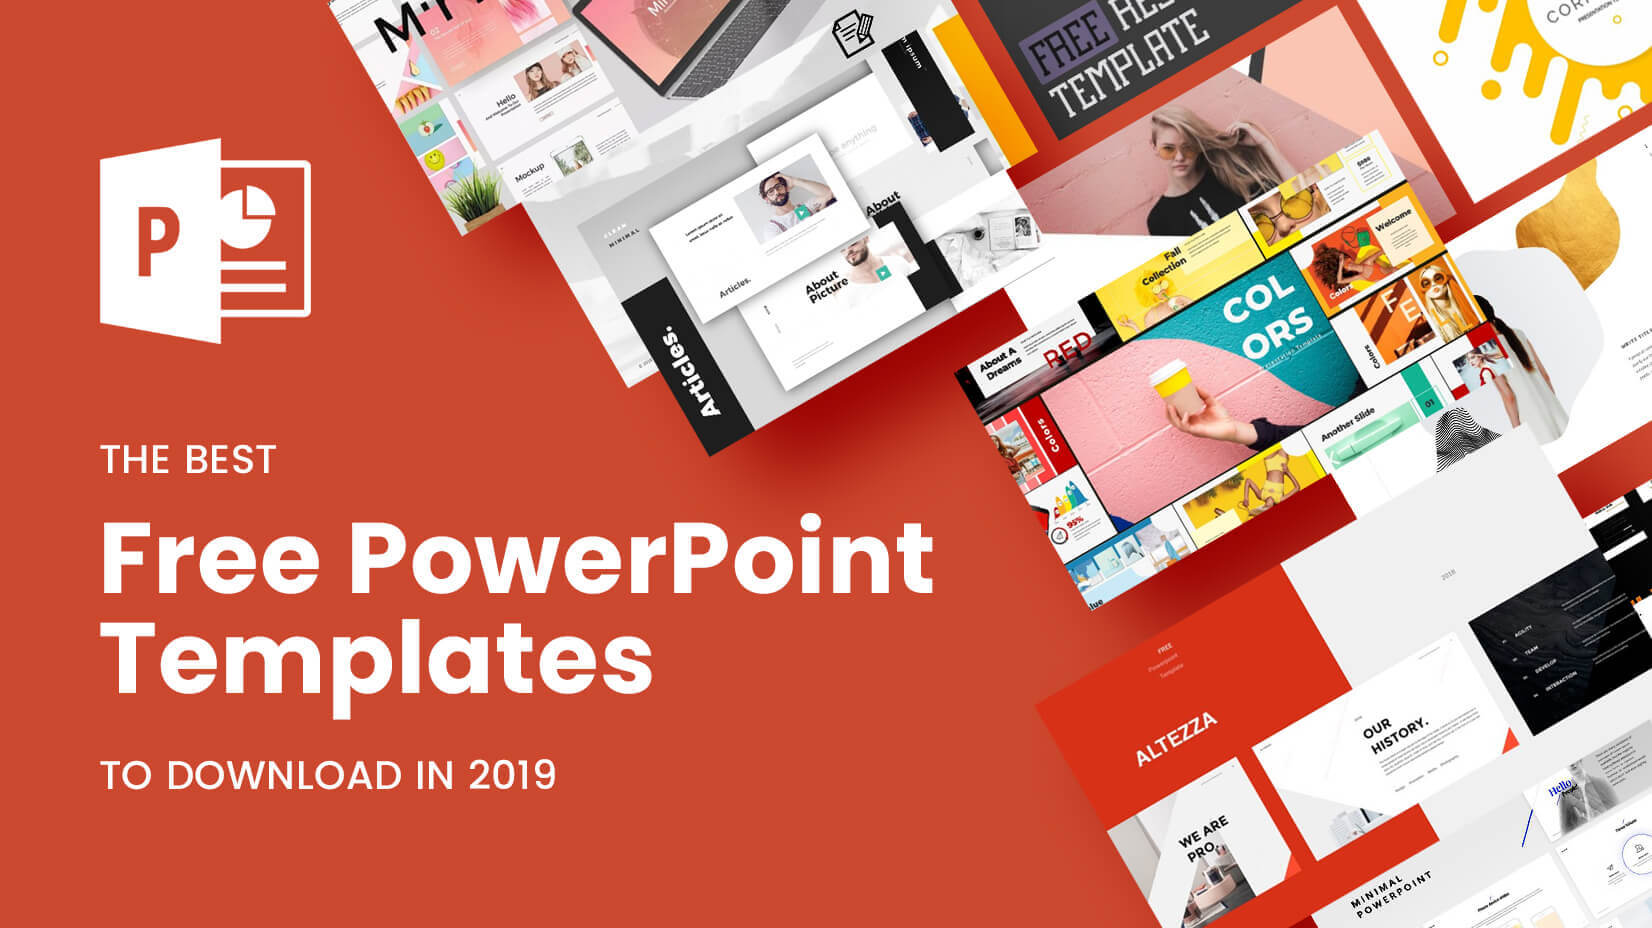 The Best Free Powerpoint Templates To Download In 2019 Intended For Fun Powerpoint Templates Free Download